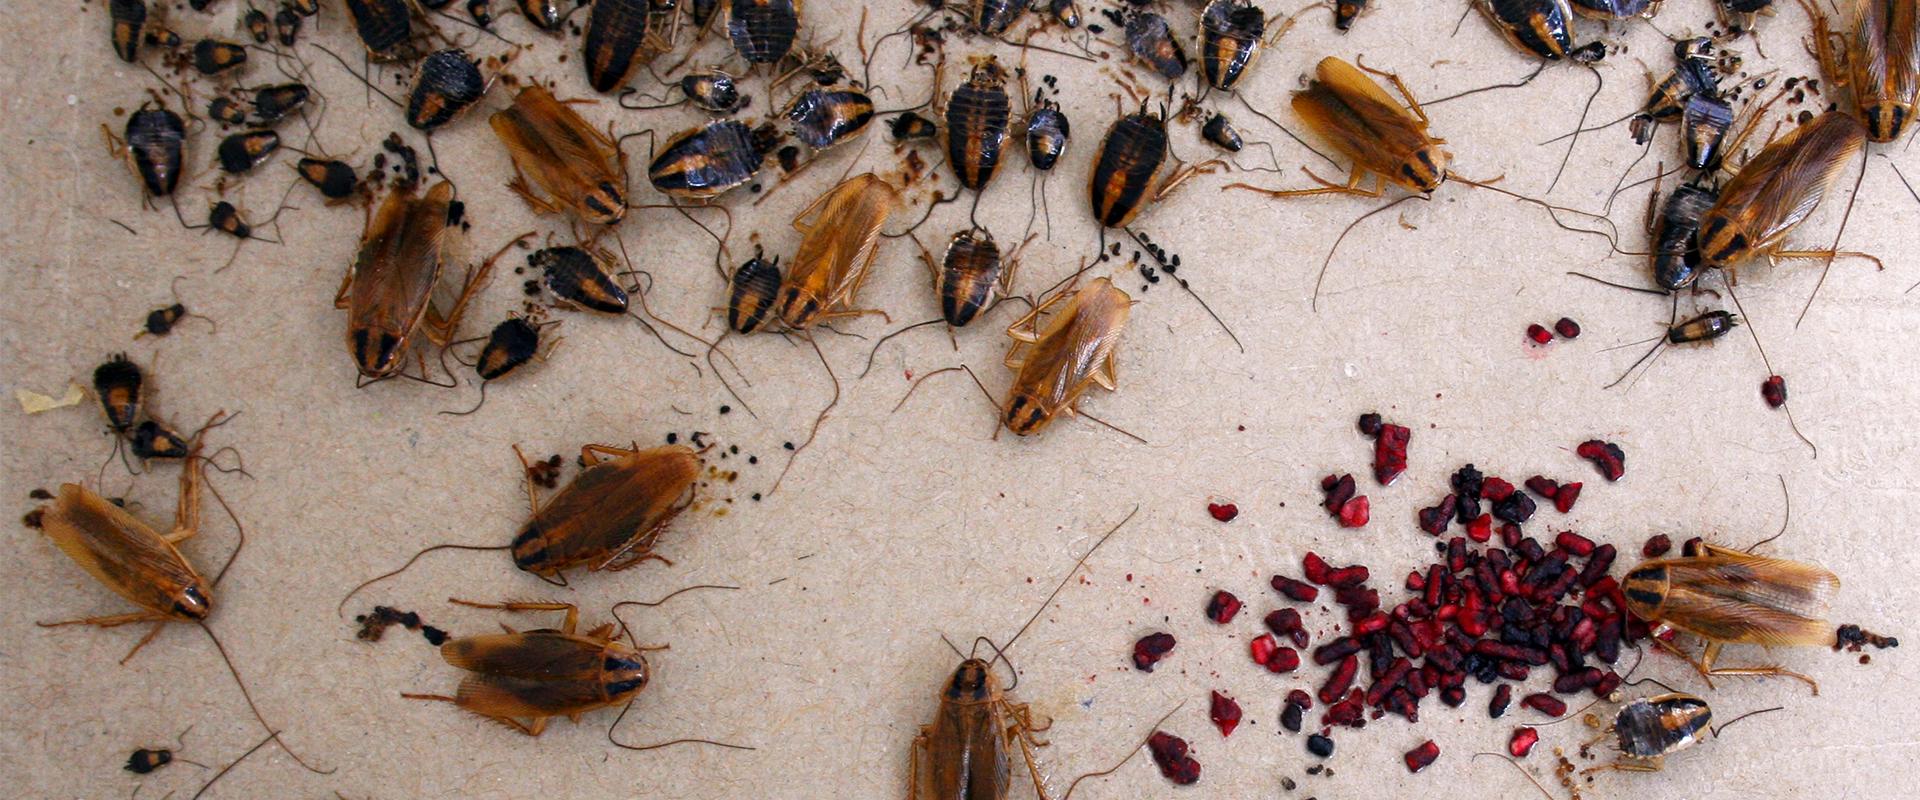 cockroaches on glue board